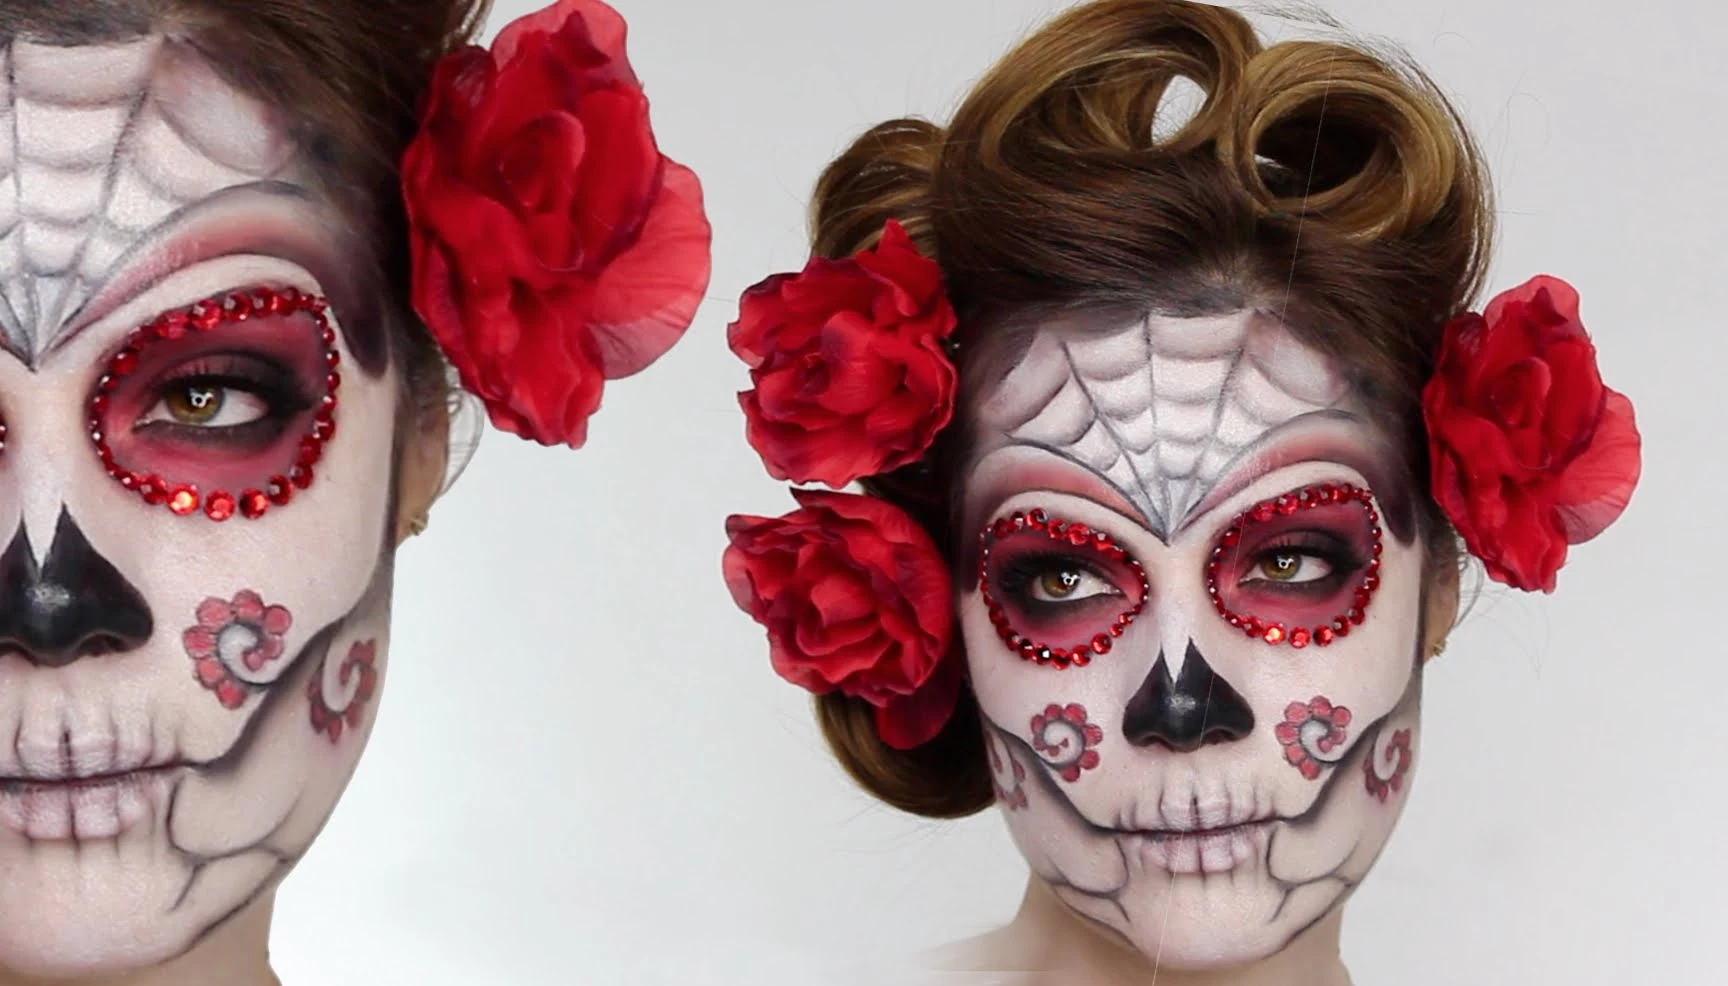 skeleton face paint, two images showing a woman's face, decorated with white, black and red paint, and red rhinestones, sugar skull costume, curled brunette hair, with red flowers